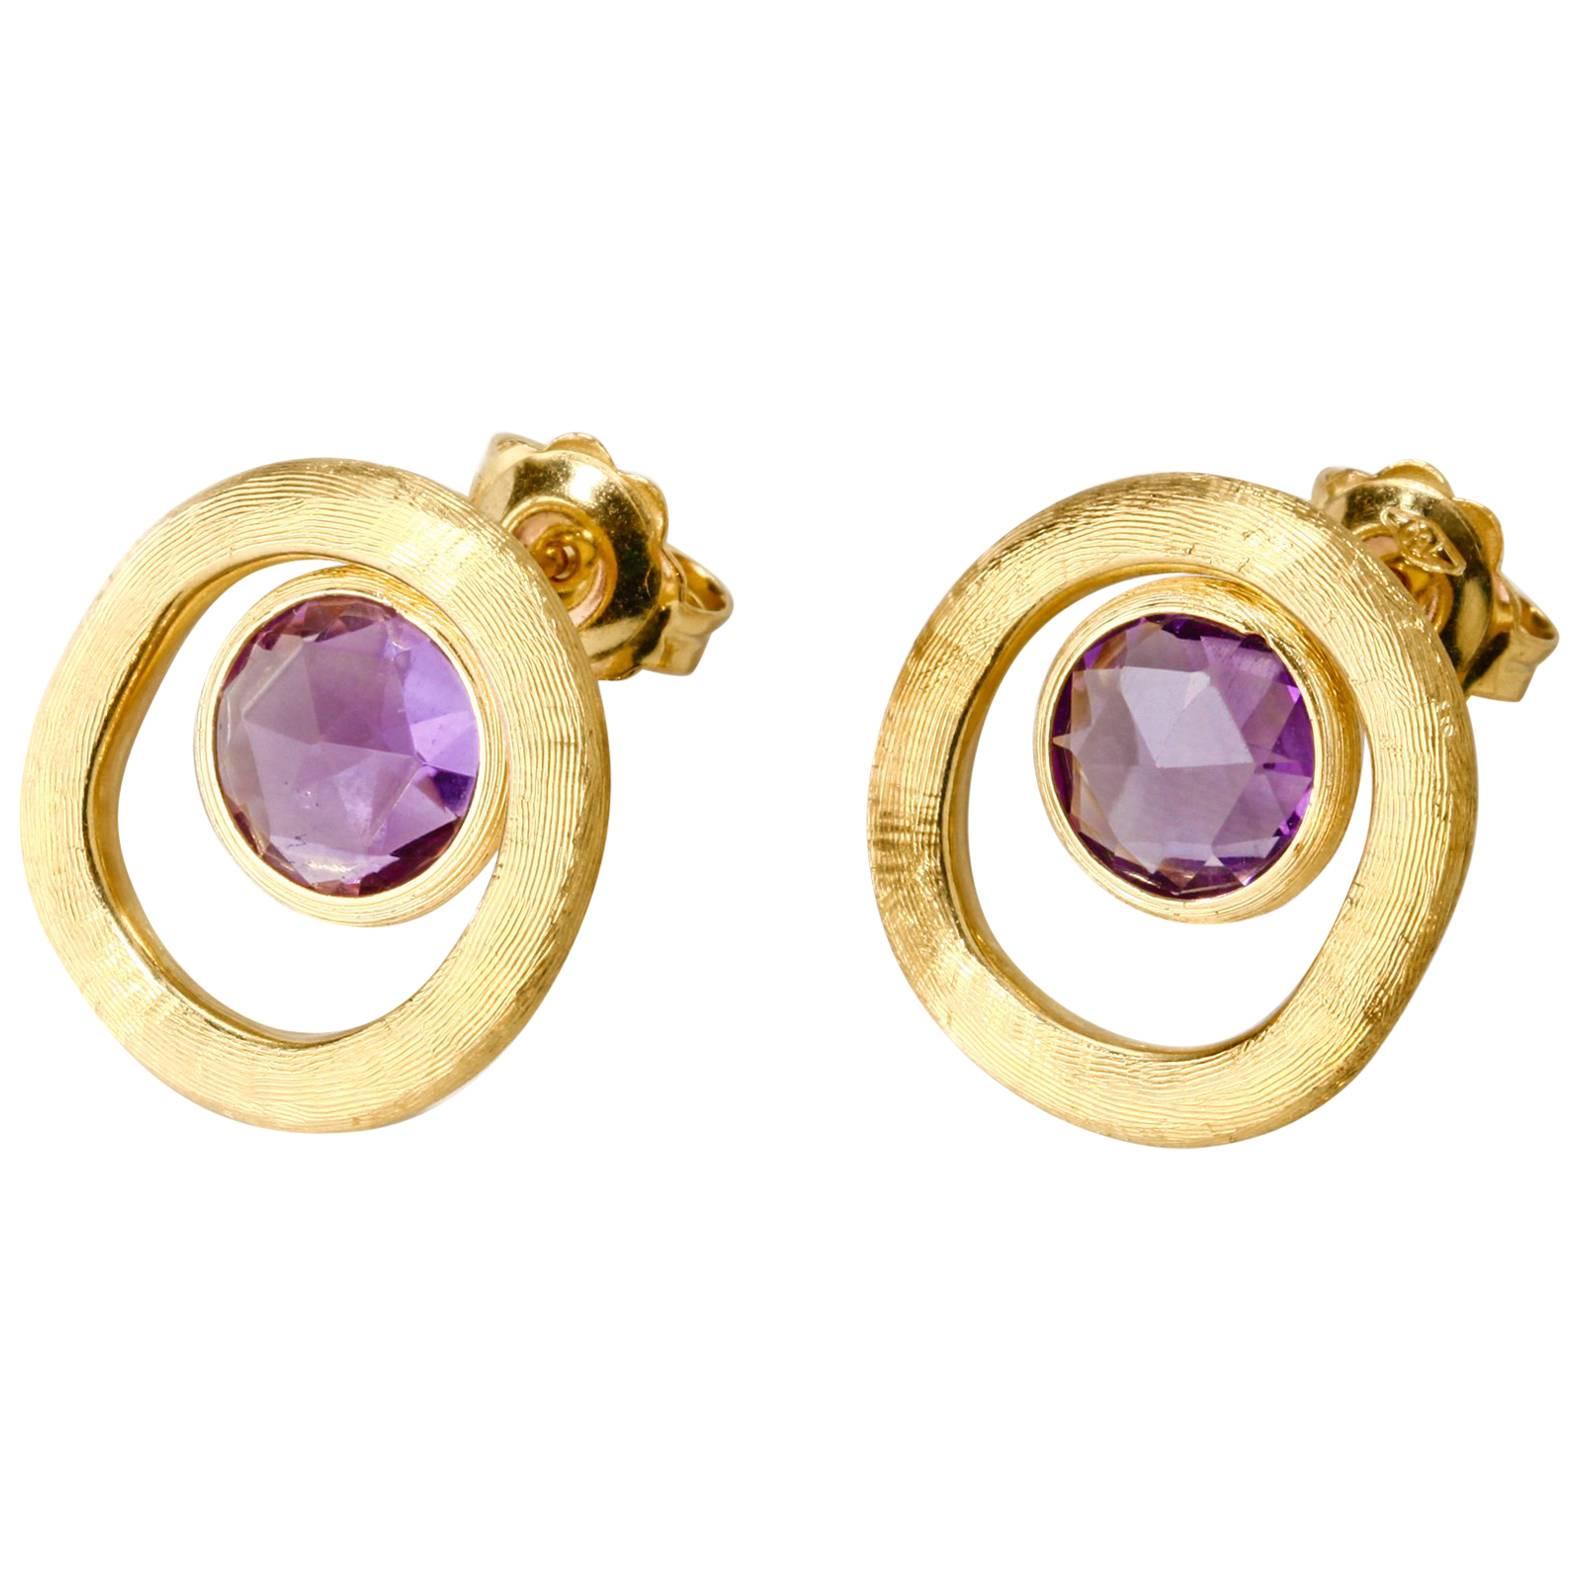 Marco Bigeco Amethyst Earrings Jaipur Color Collection 18 Karat Yellow Gold